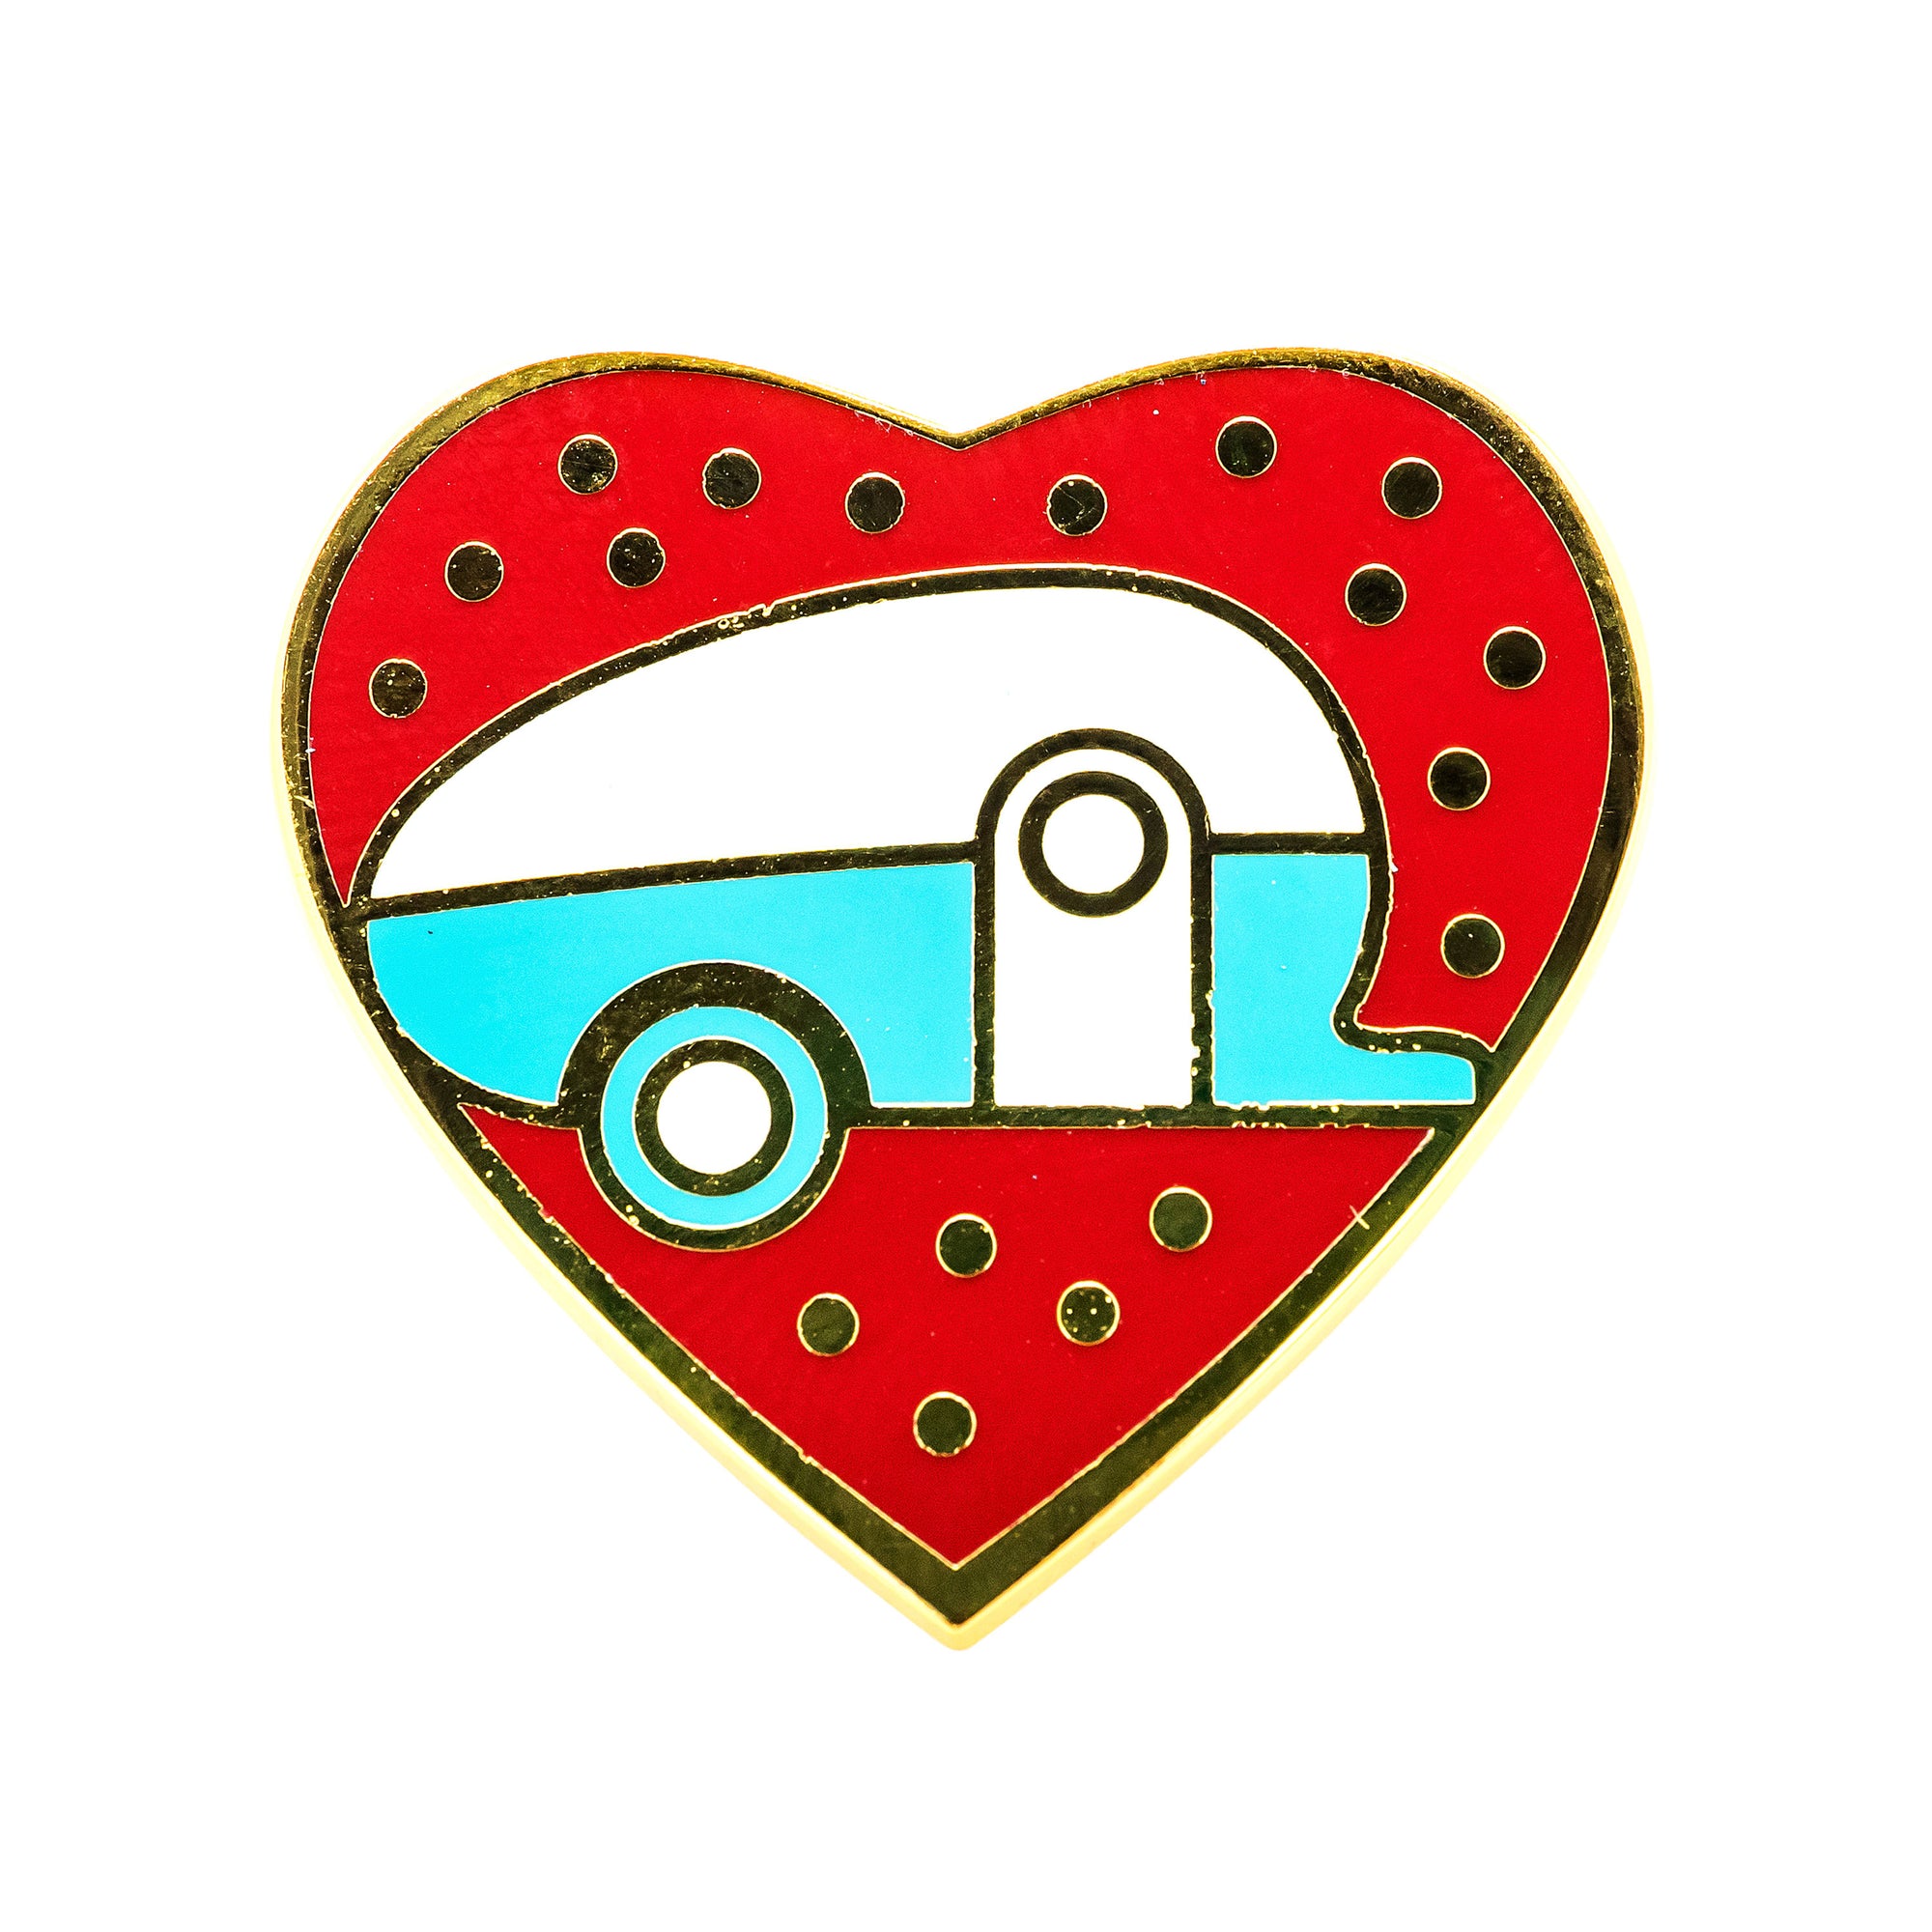 Camco 53261 "Life is Better at the Campsite" Enamel Pin - Red Heart with Teardrop Trailer